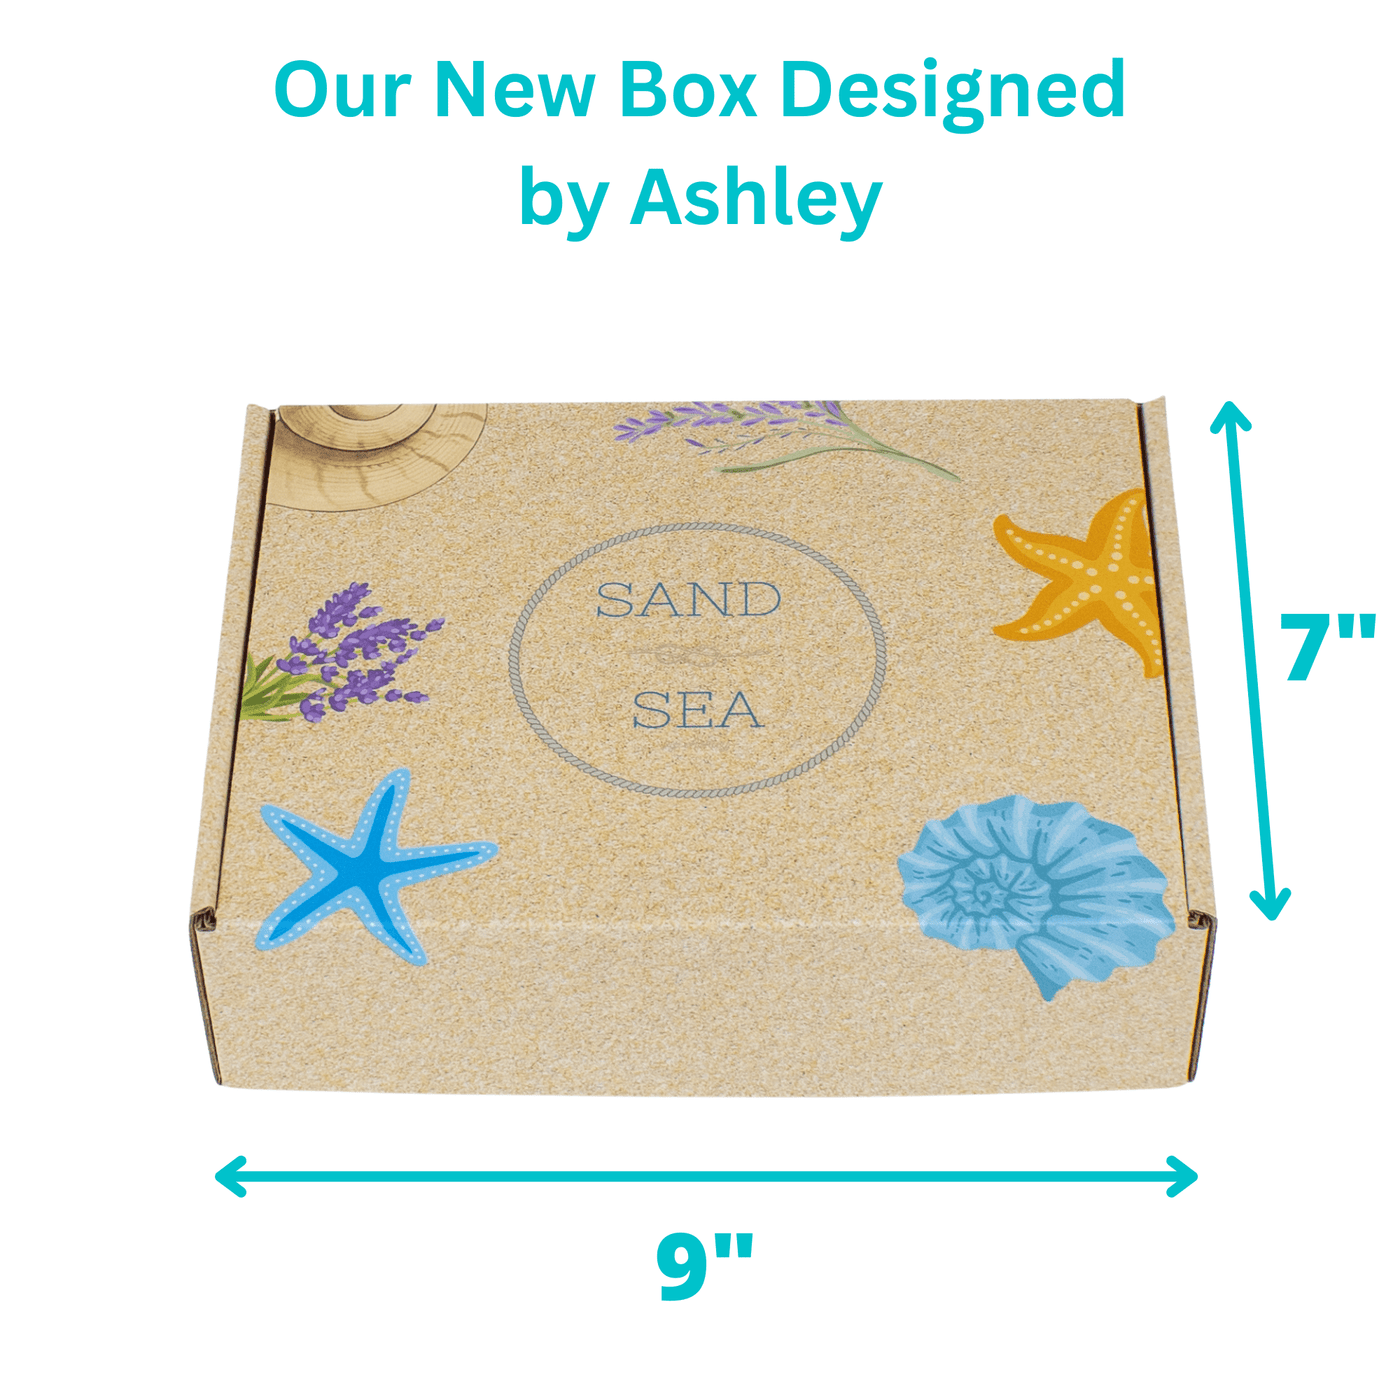 Happy Birthday Pampering Spa Gift Box - Ocean Dream Spa Gift Baskets for Mom, Sister, Friend - 10 Pieces - Sand & Sea by Ashley